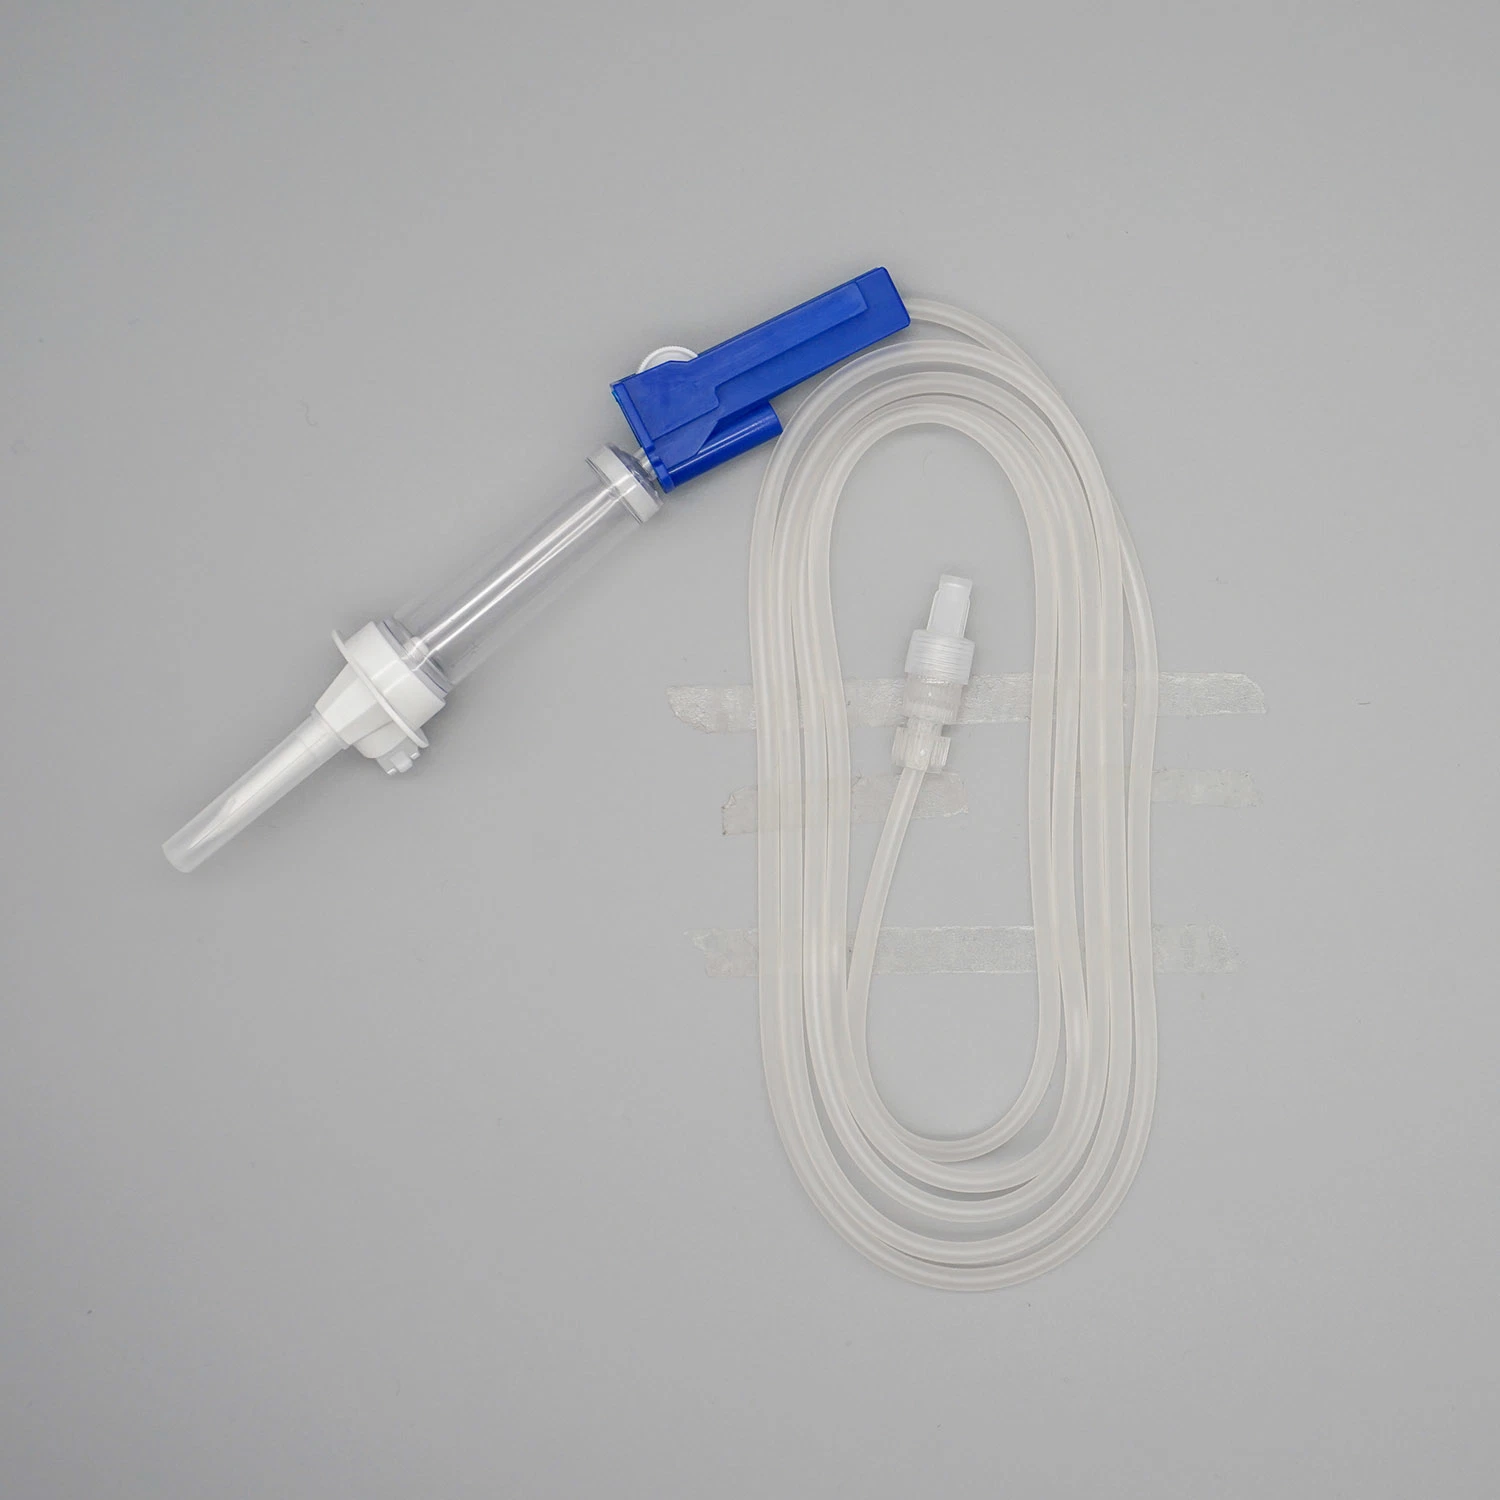 21g/18g OEM Disposable Medical Supplies Infusion Set for Single Use